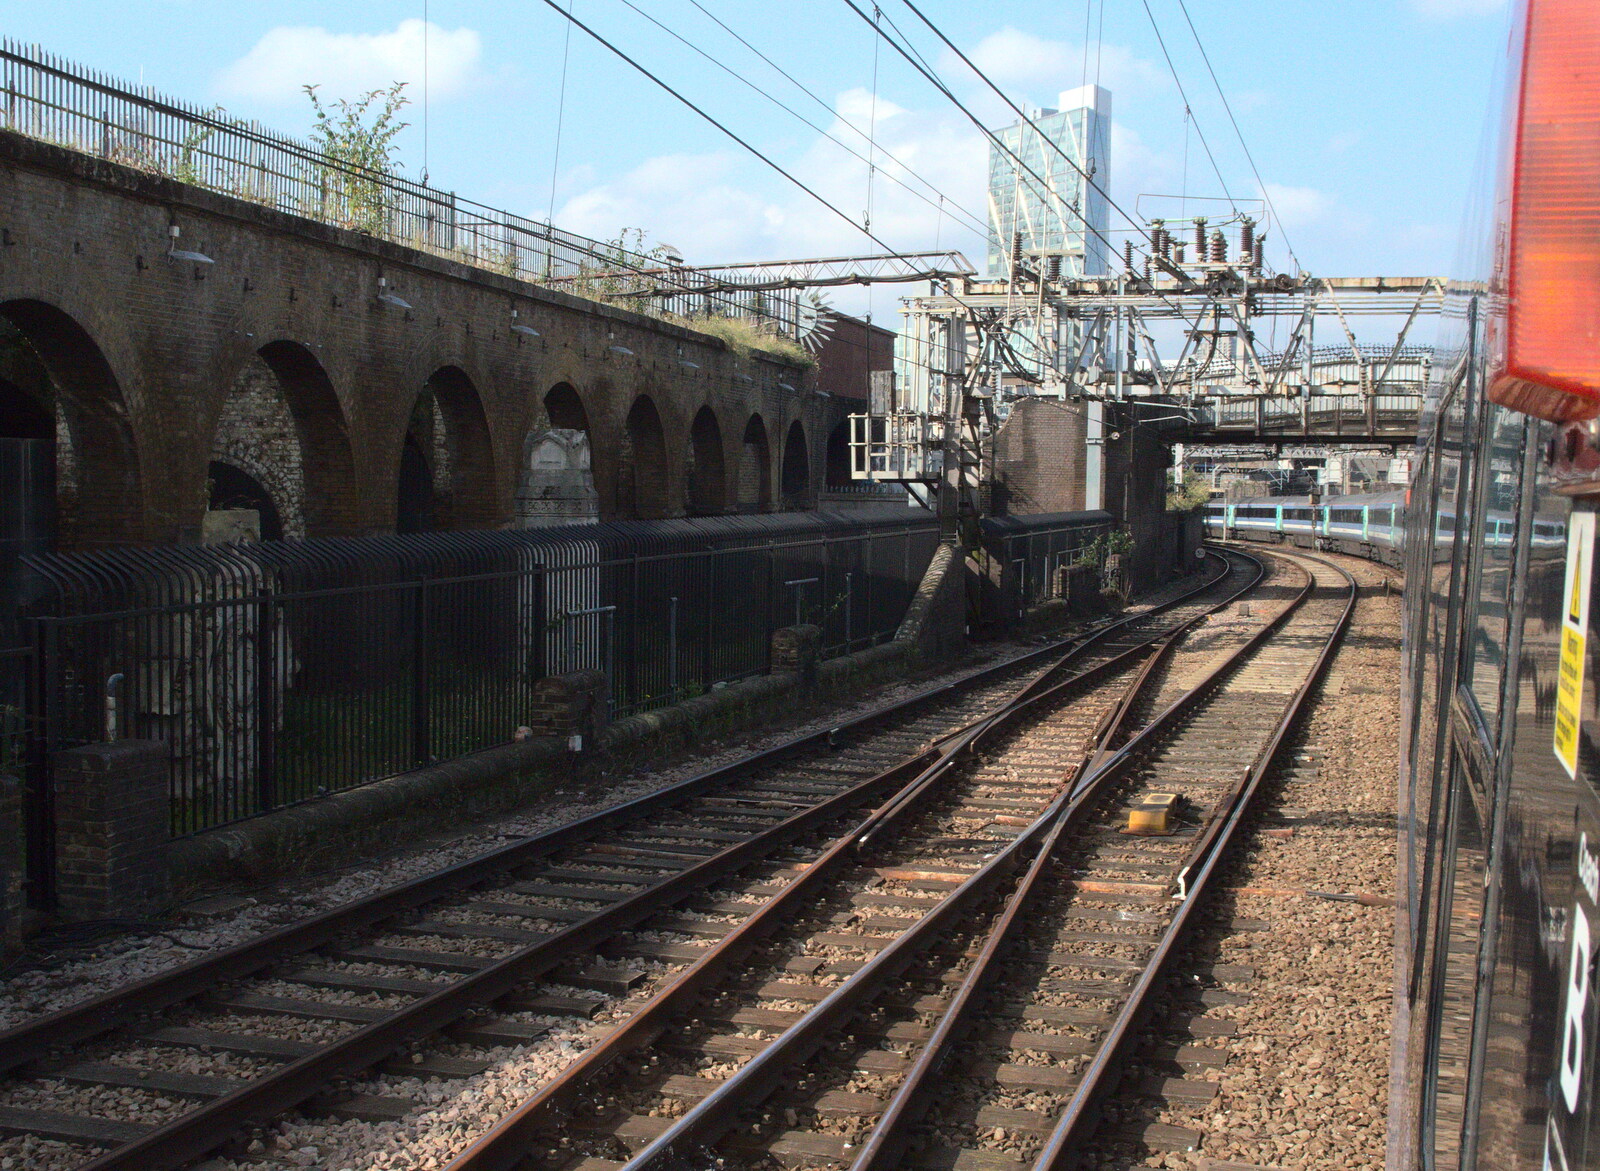 The train wends its way to Liverpool Street from New Railway and a Trip to Ikea, Ipswich and Thurrock - 19th September 2014